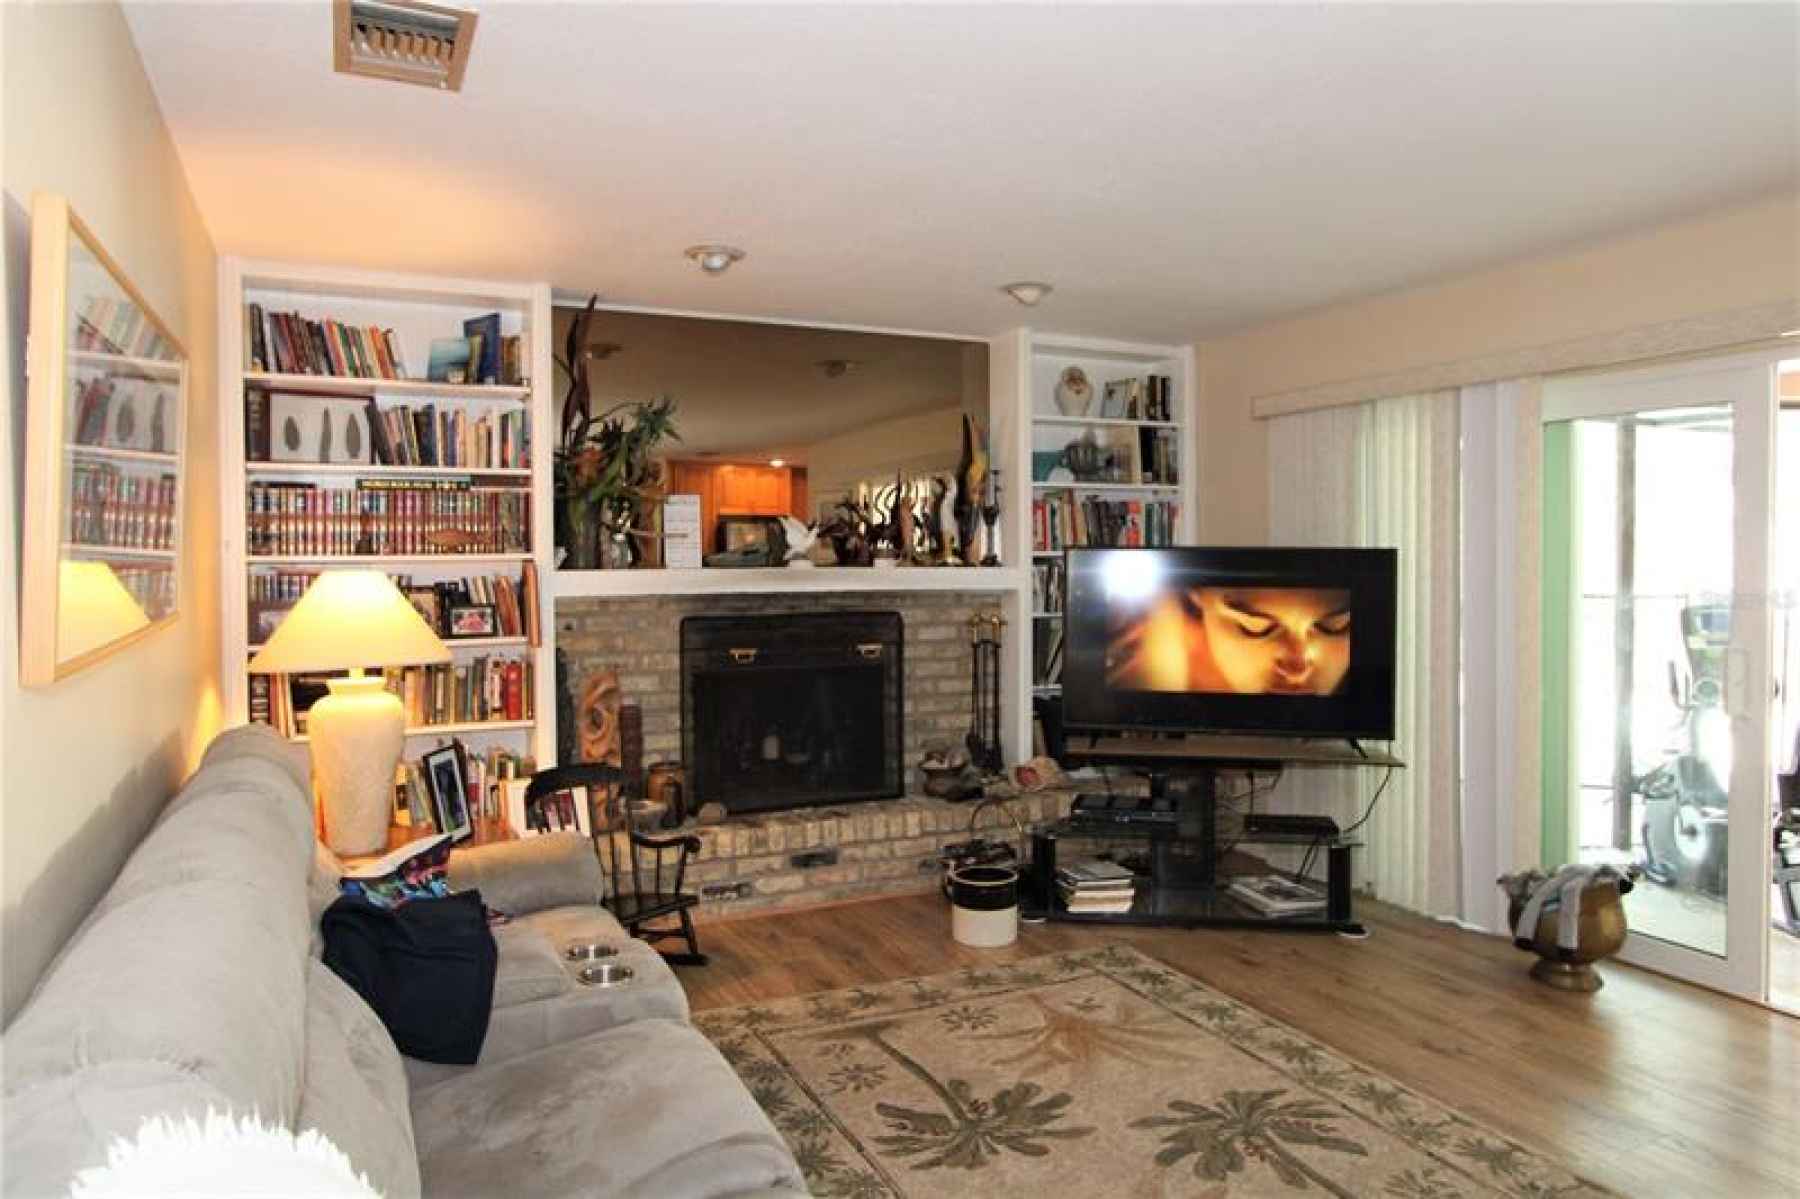 Family room offers access to enclosed pool and patio area.